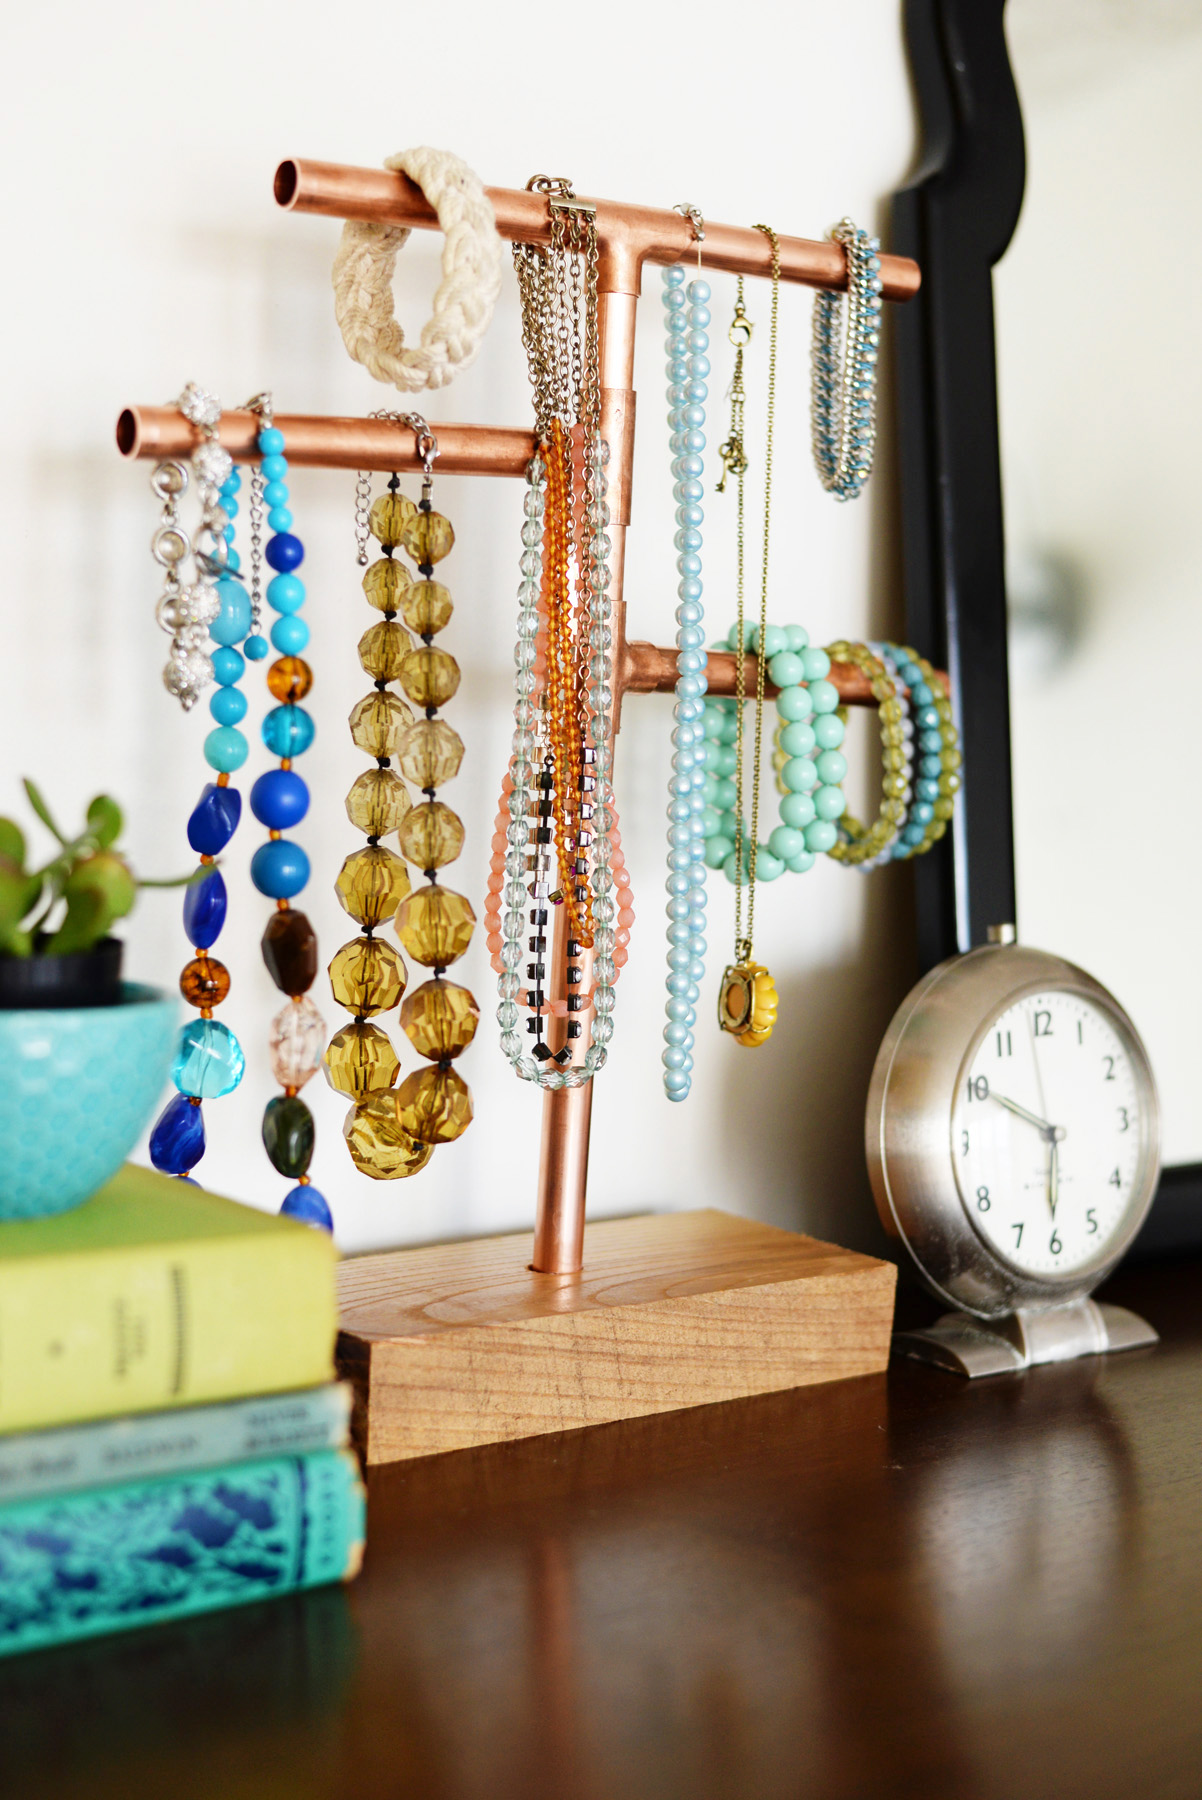 DIY Jewelry Display Ideas That Are Both Functional And Aesthetic